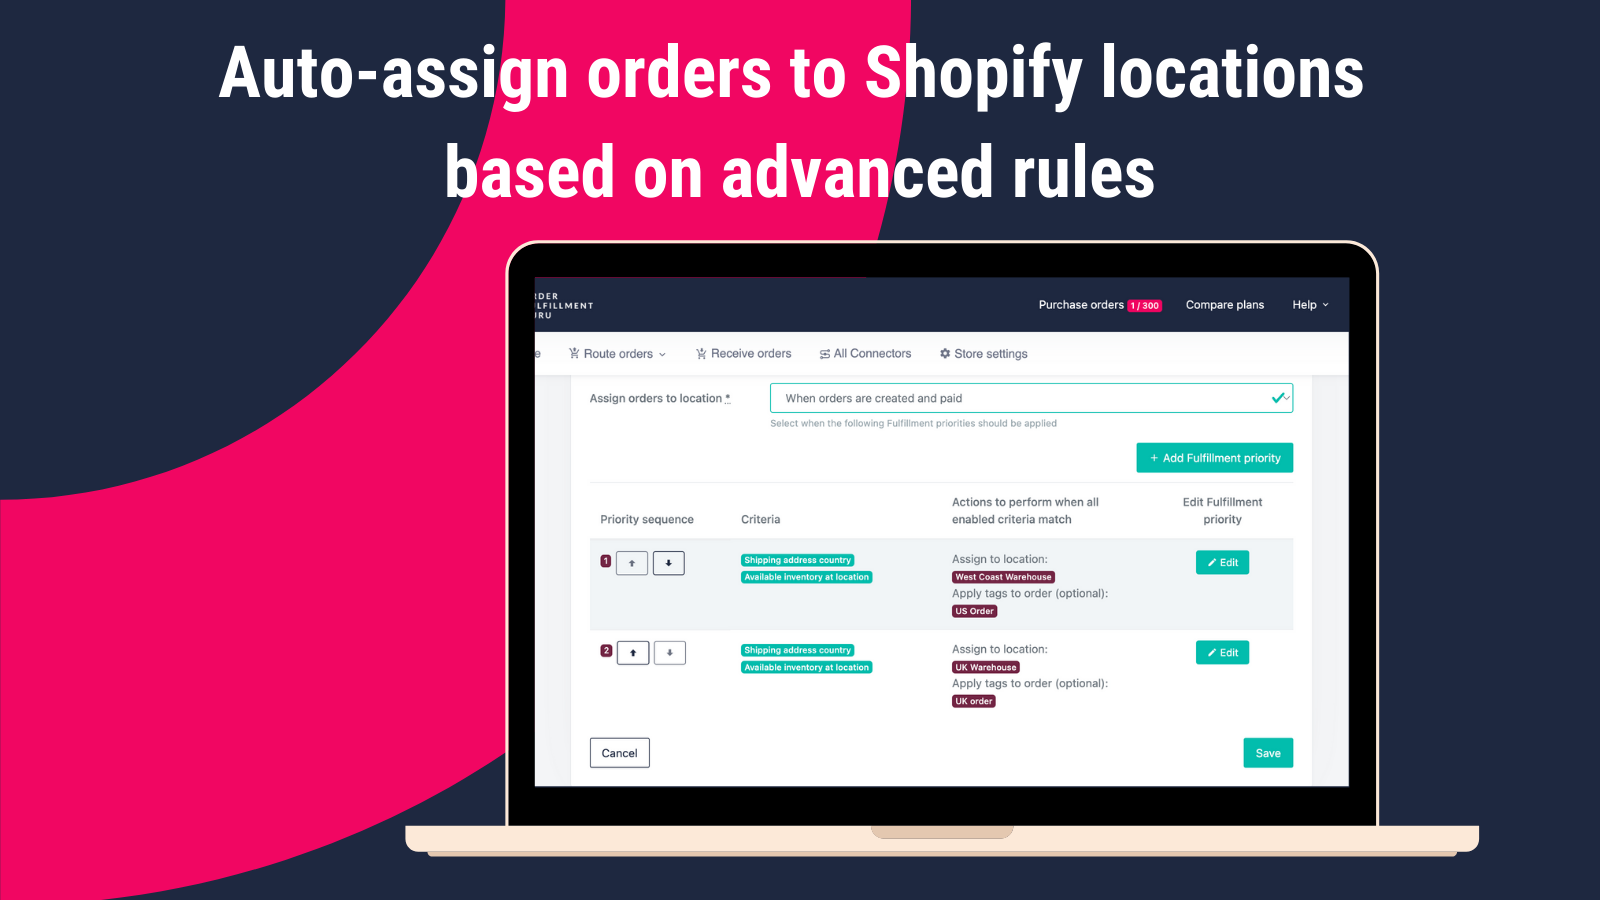 Auto route orders to Shopify locations based on advanced rules